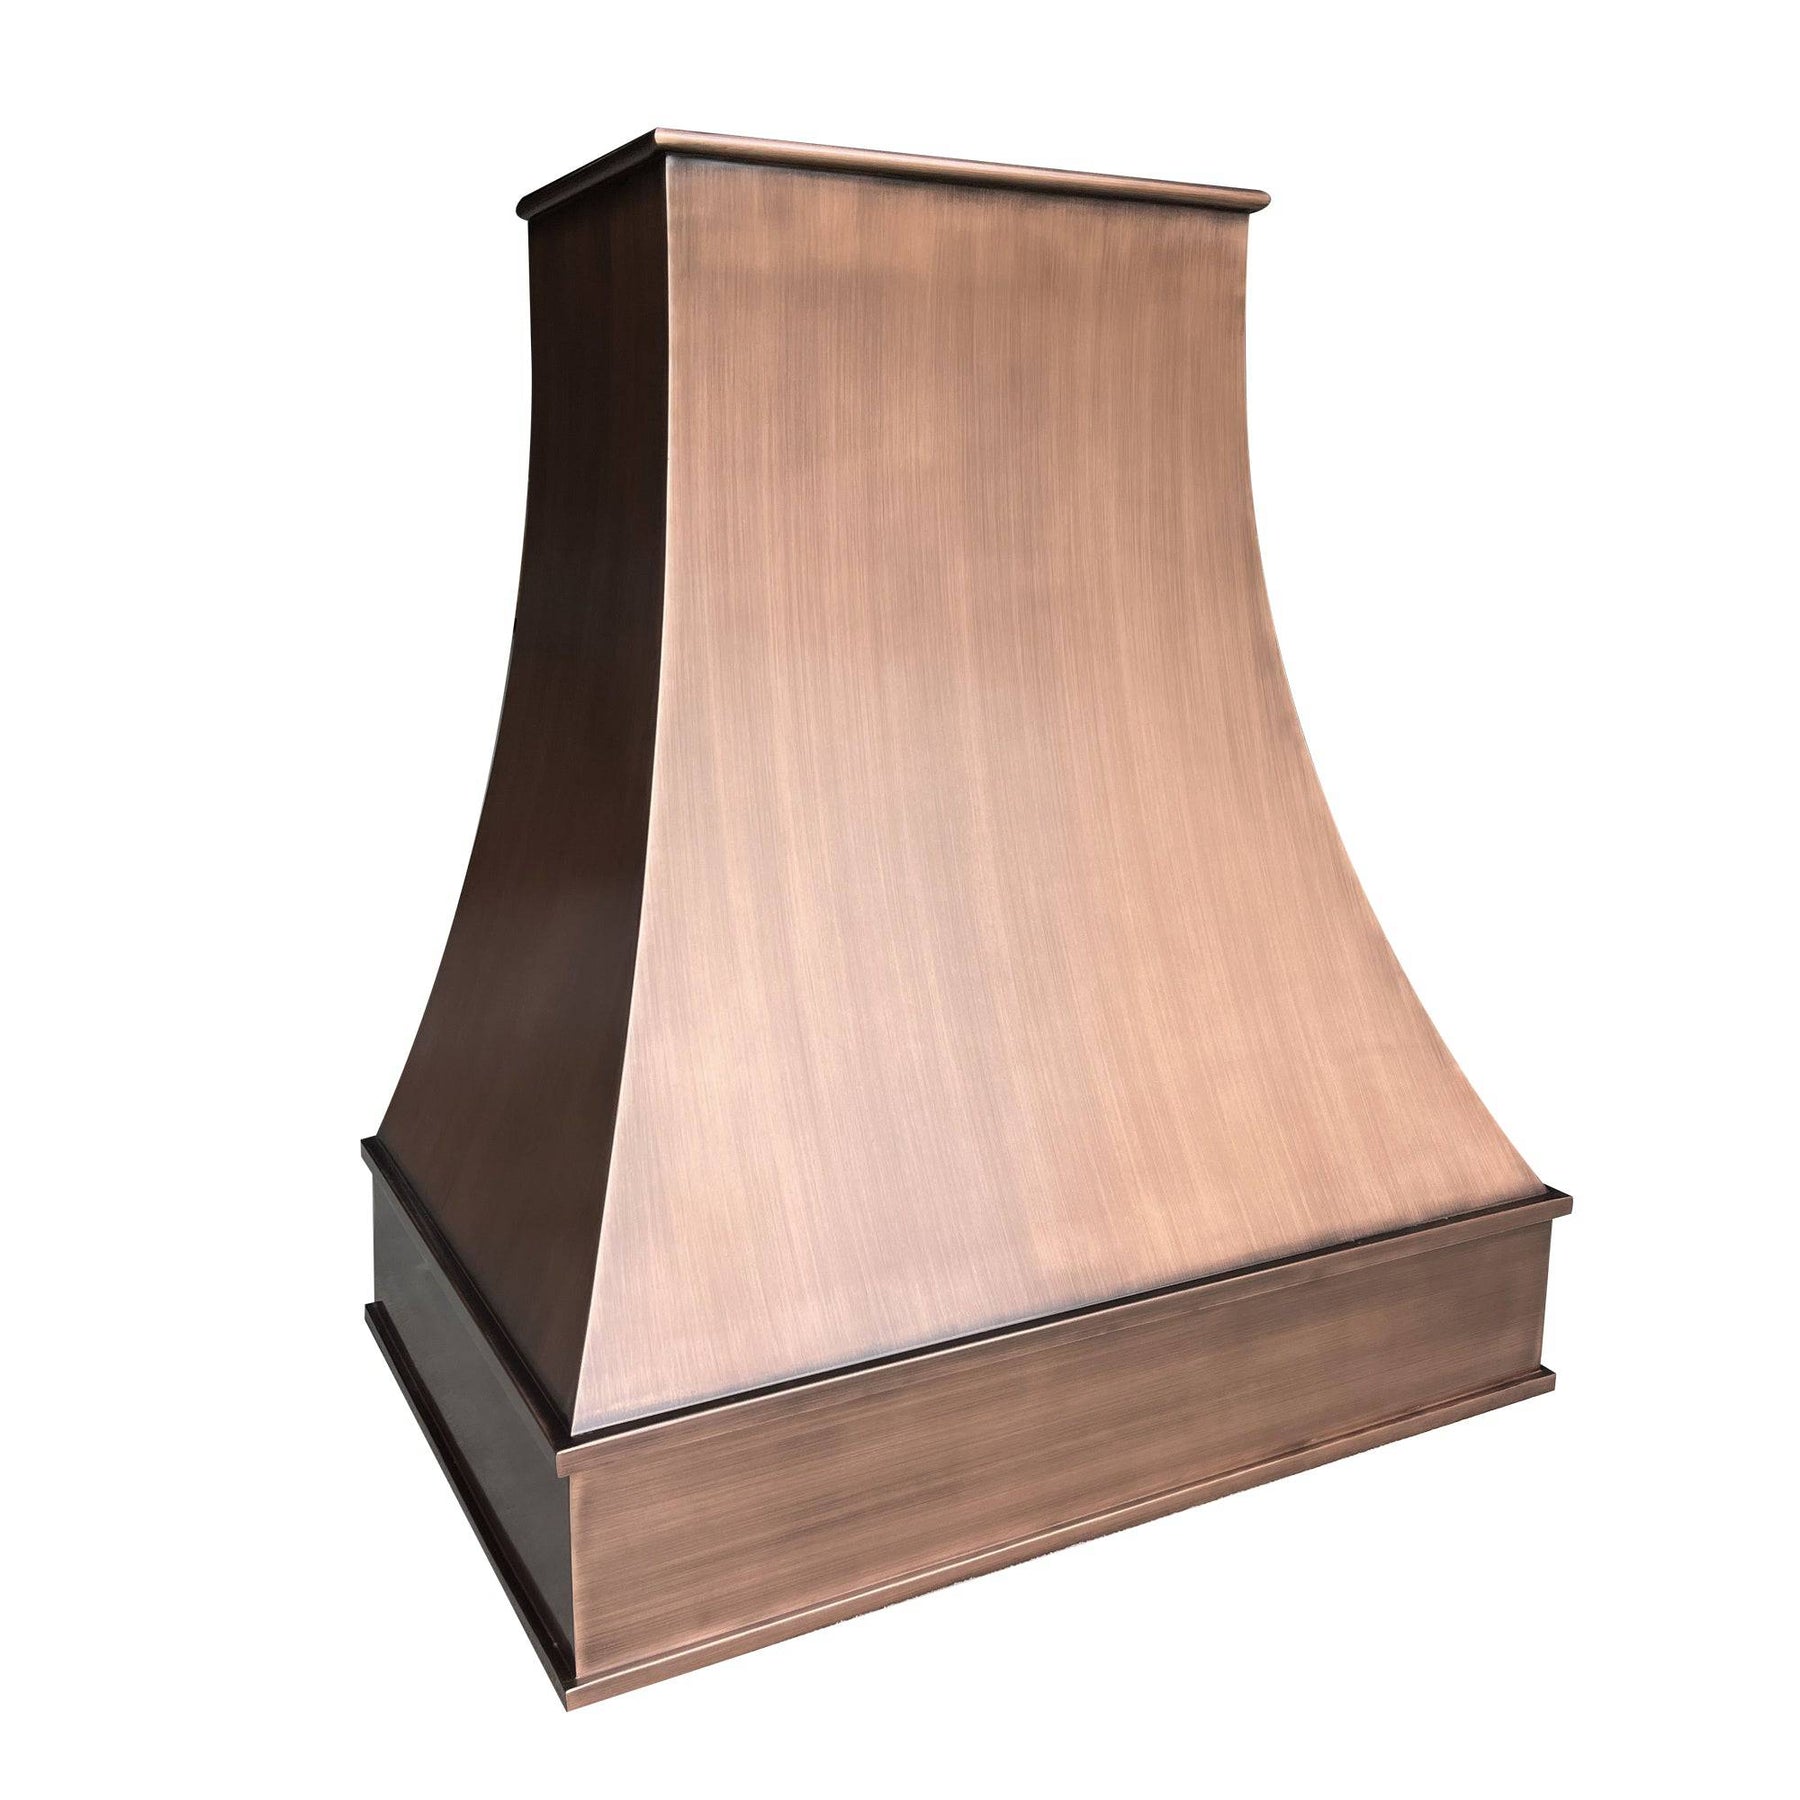 Fobest Farmhouse Custom Antique Copper Range Hood with Smooth Texture FCP-49 - Copper Range Hood-Fobest Appliance